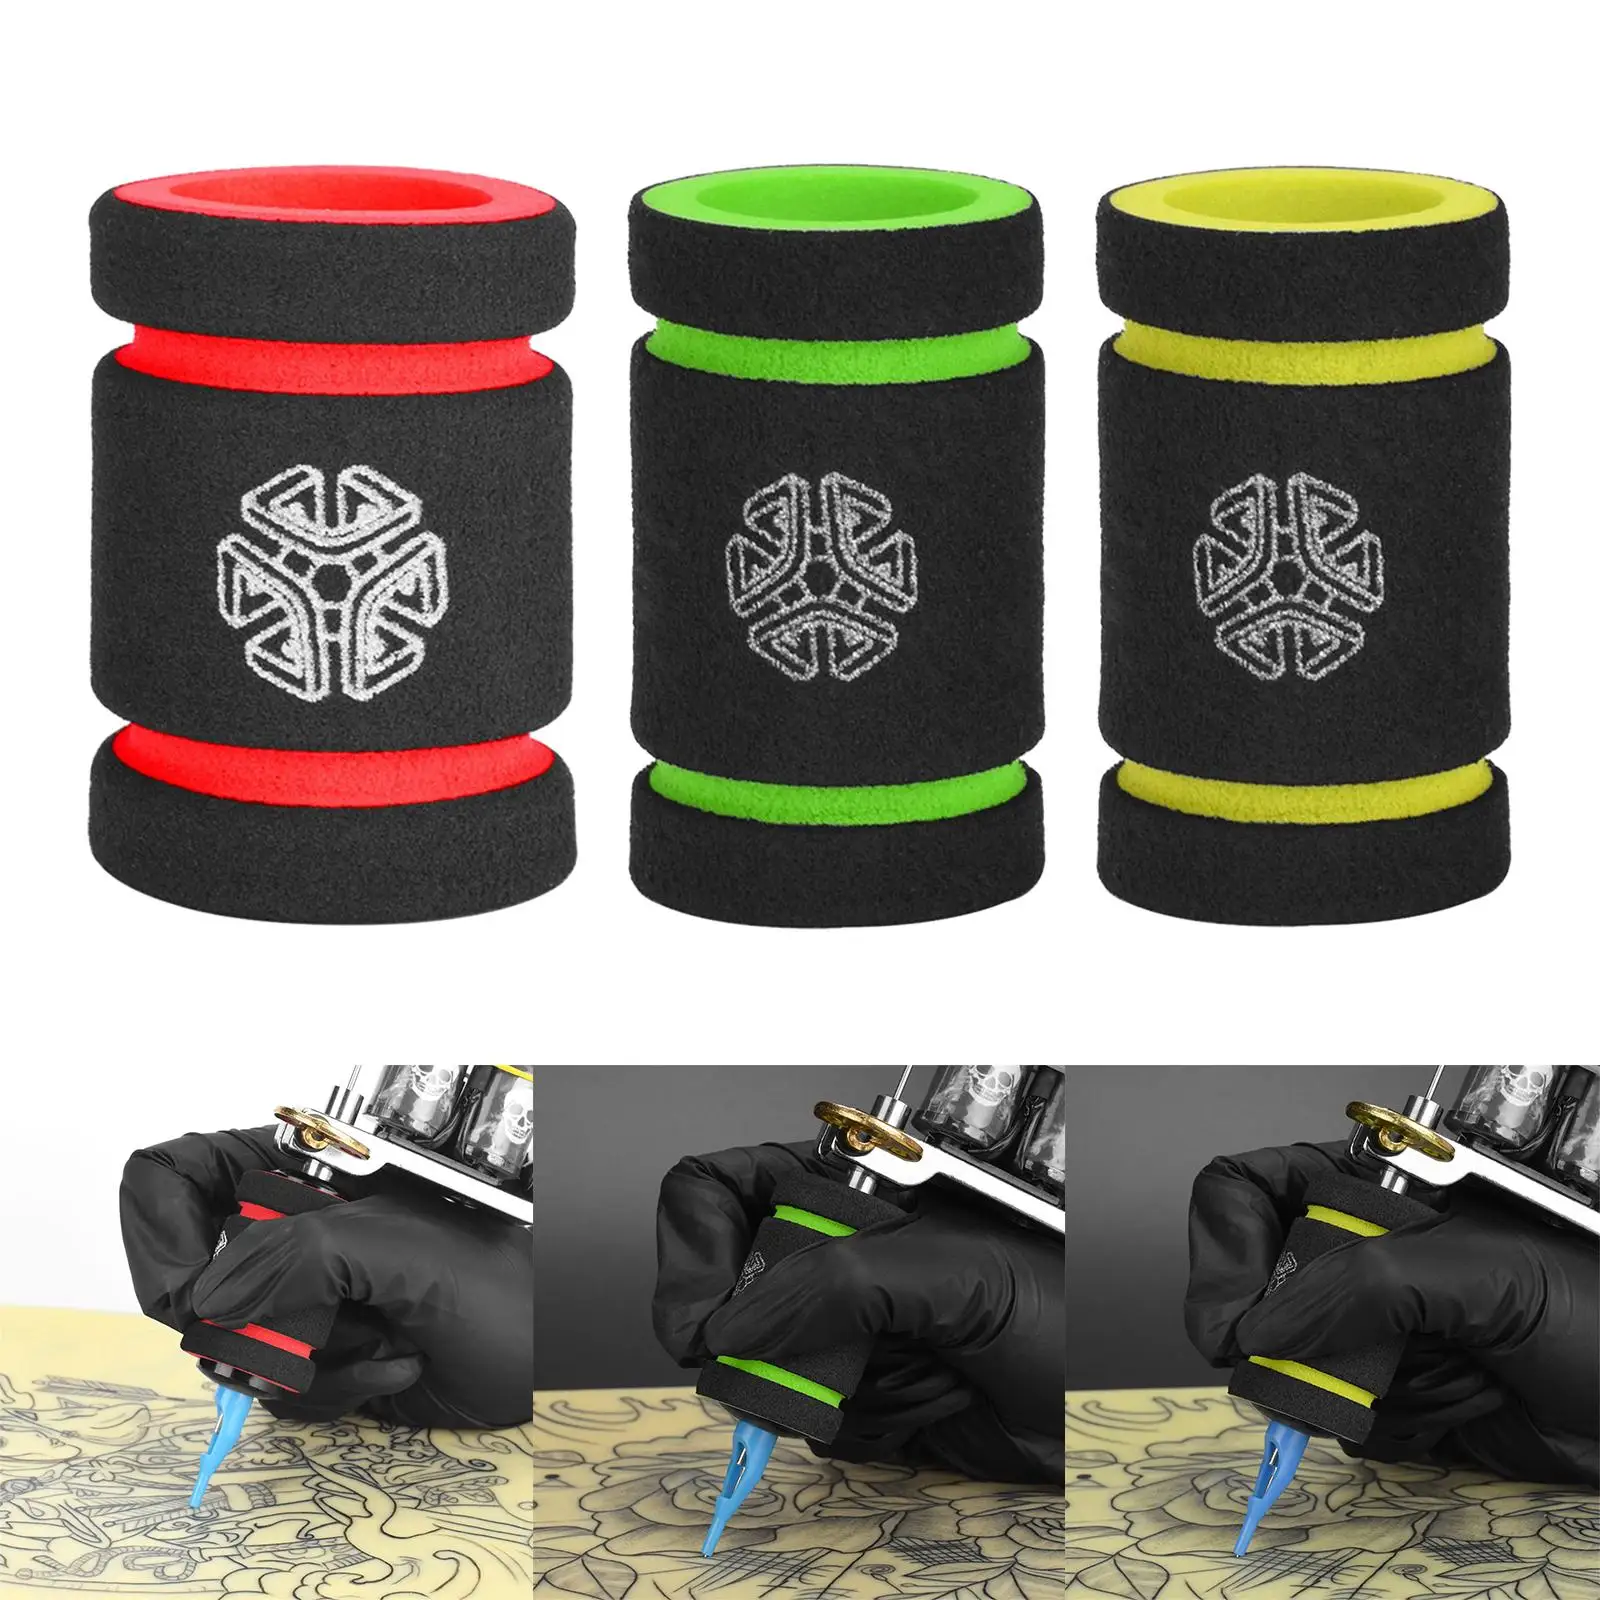 22mm Tattoo Grip Cover Non Slip Foam Tattoo Grip Handle Holder Cover for 1inch Tattoo Tube Grips Tattoo Pen Cover